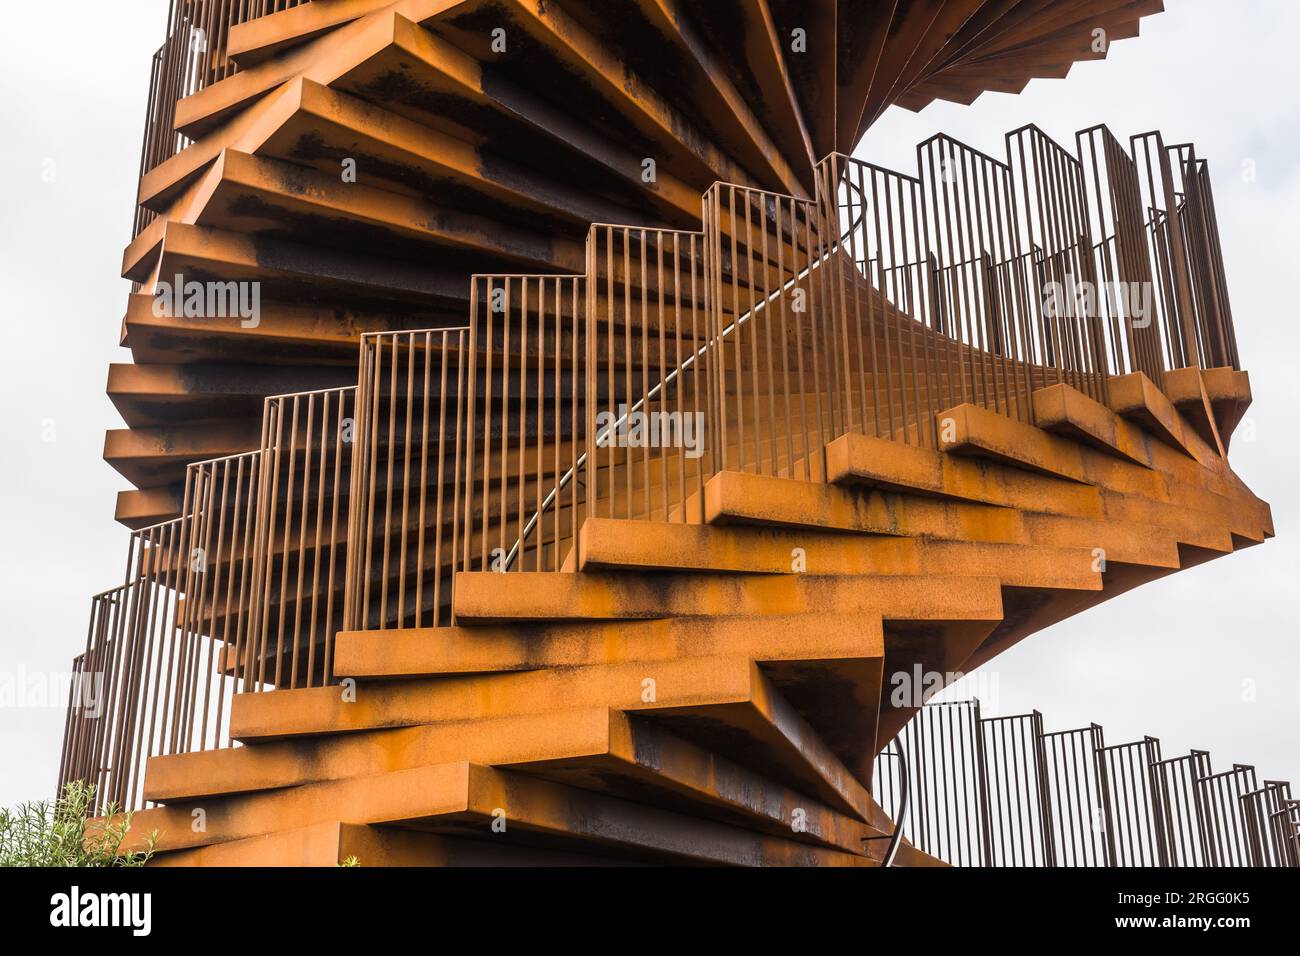 Rusty coiled steel steps of the Marsh Tower in South Denmark Stock Photo